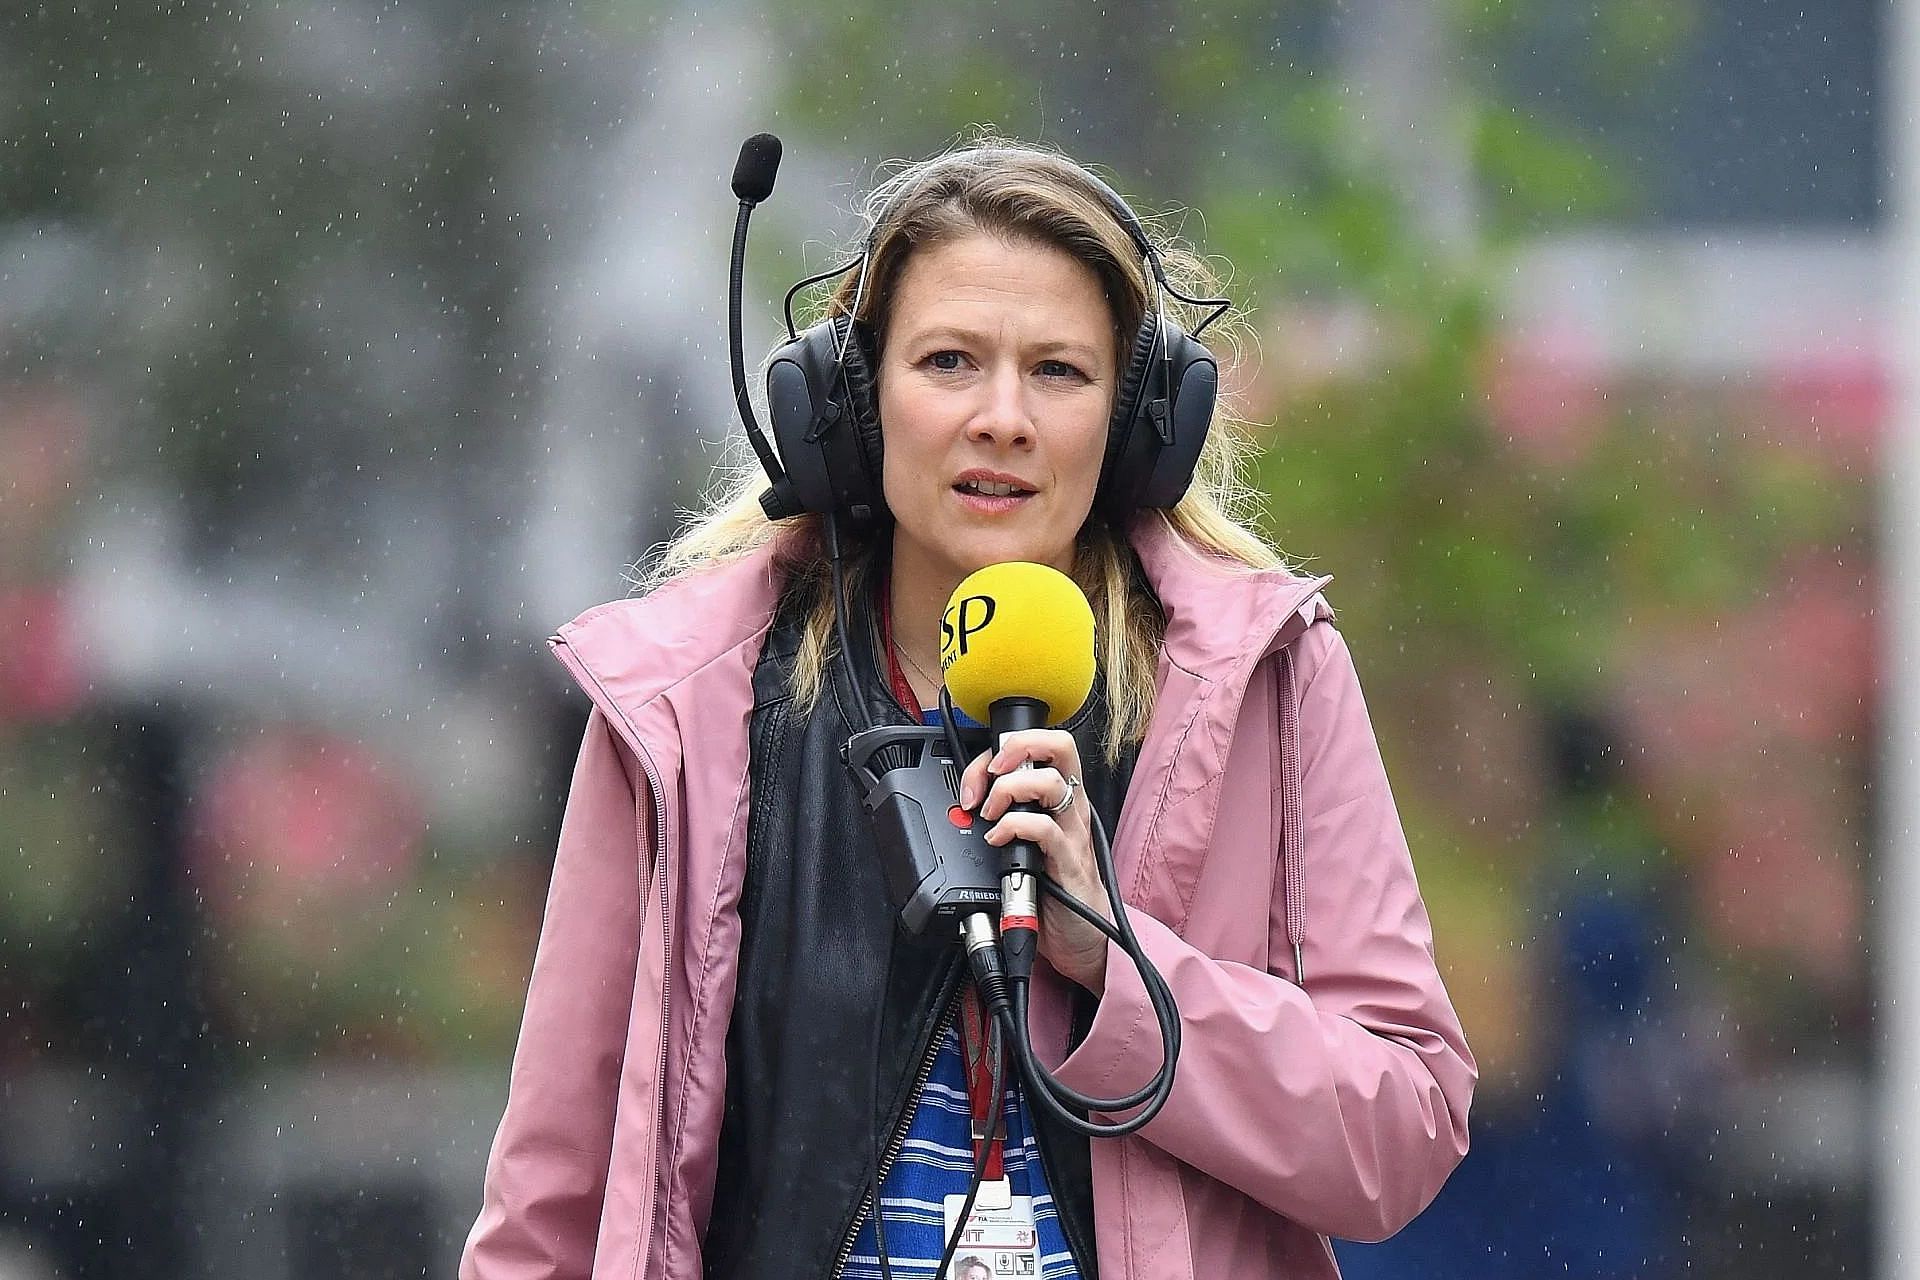 Jennie Gow working in the paddock during previews ahead of the 2018 F1 United States Grand Prix. (Photo by Clive Mason/Getty Images)